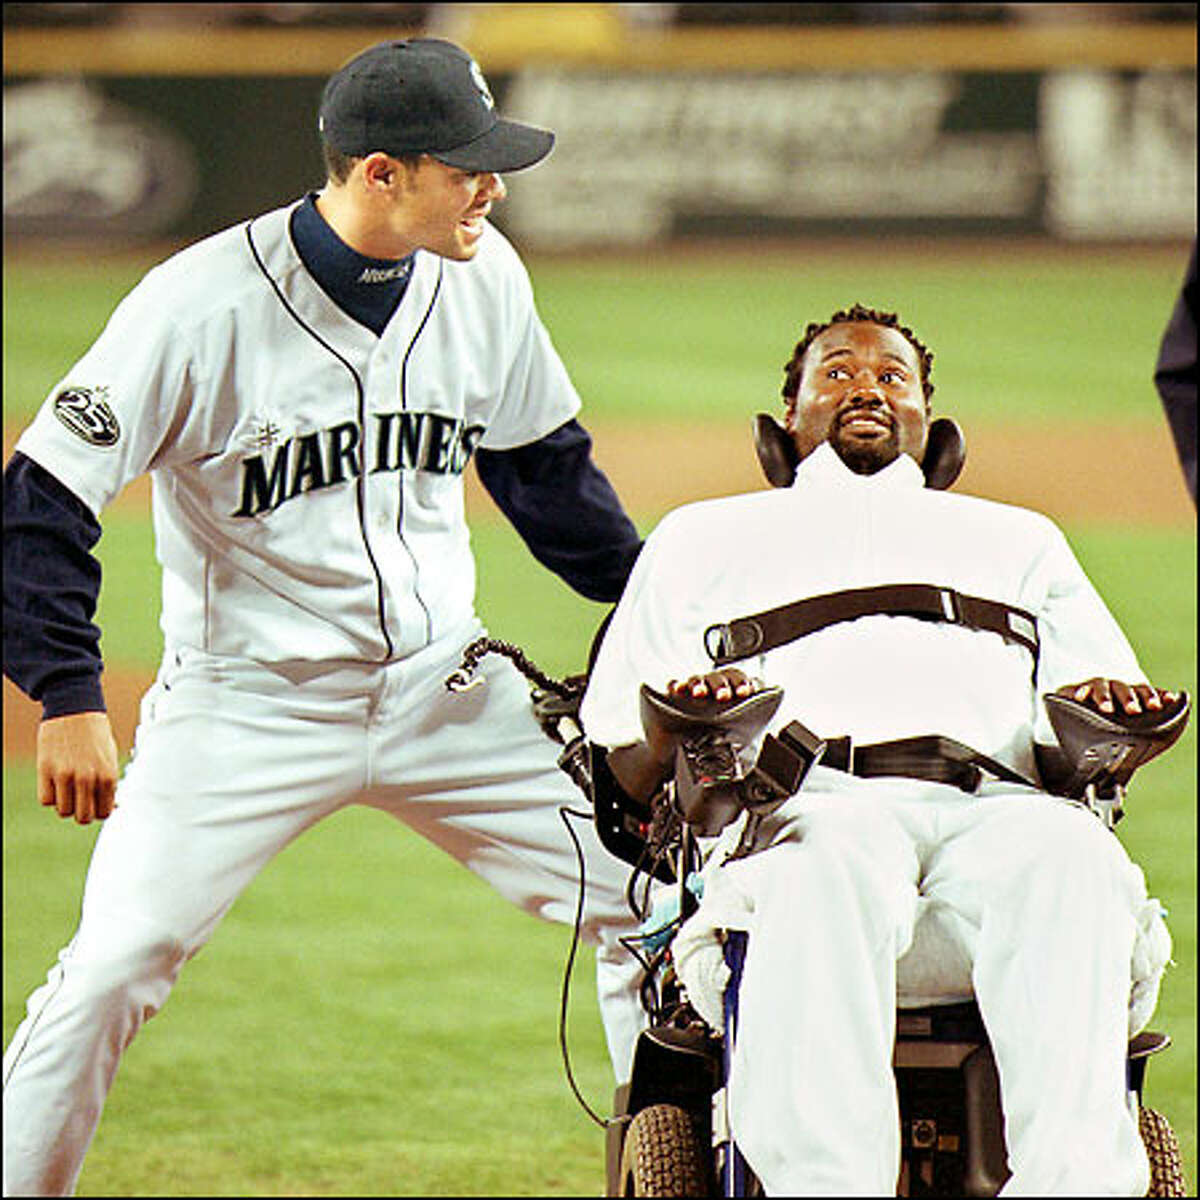 Former University of Washington football player Curtis Williams jokes with Mariner Charles Gipson before a game at Safeco Field on April 24. Williams, who threw out the first pitch prior to the game against Anaheim, became paralyzed after being injured during a game at Stanford on Oct. 28, 2000. Williams died in Clovis, Calif., on May 6.